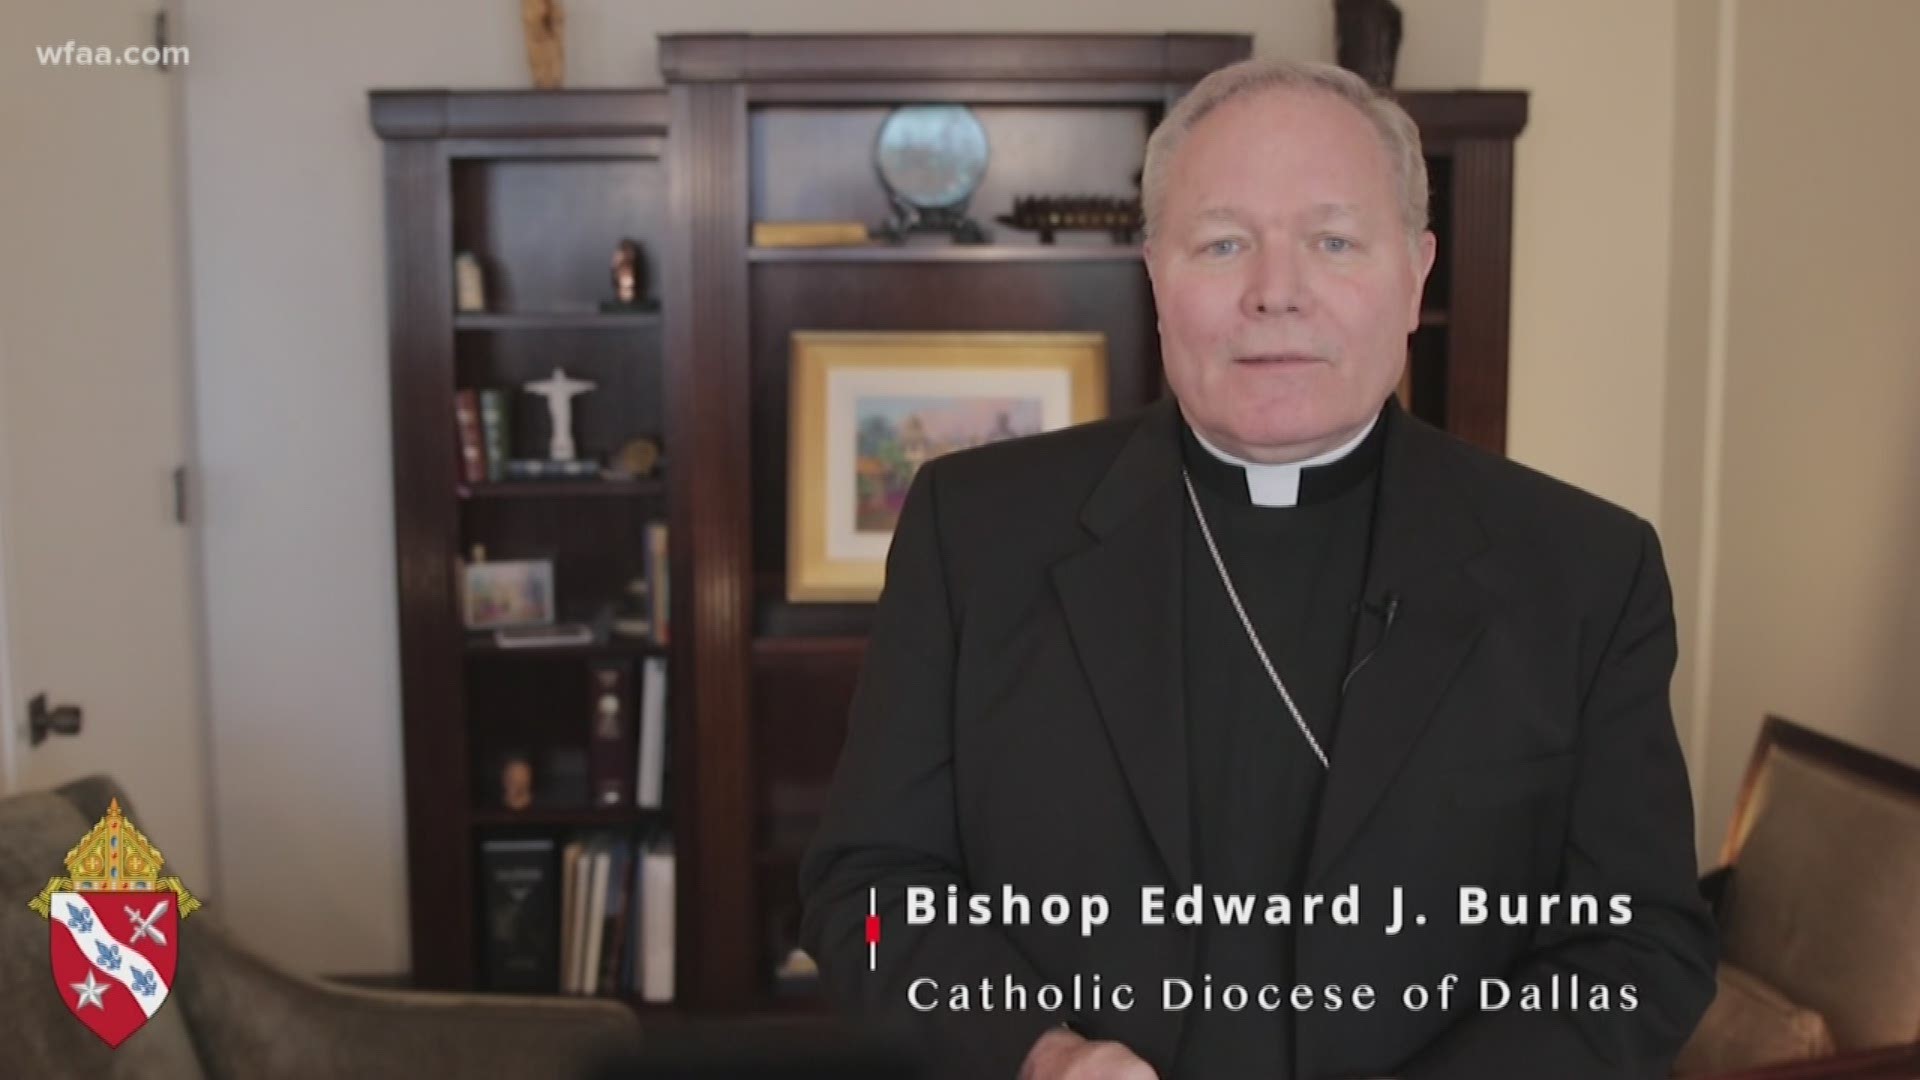 In a video posted on Twitter and a document released Friday, Bishop Edward J. Burns made a rebuttal to accusations accusing the Catholic Diocese of Dallas of withholding information as police investigate sexual abuse allegations.